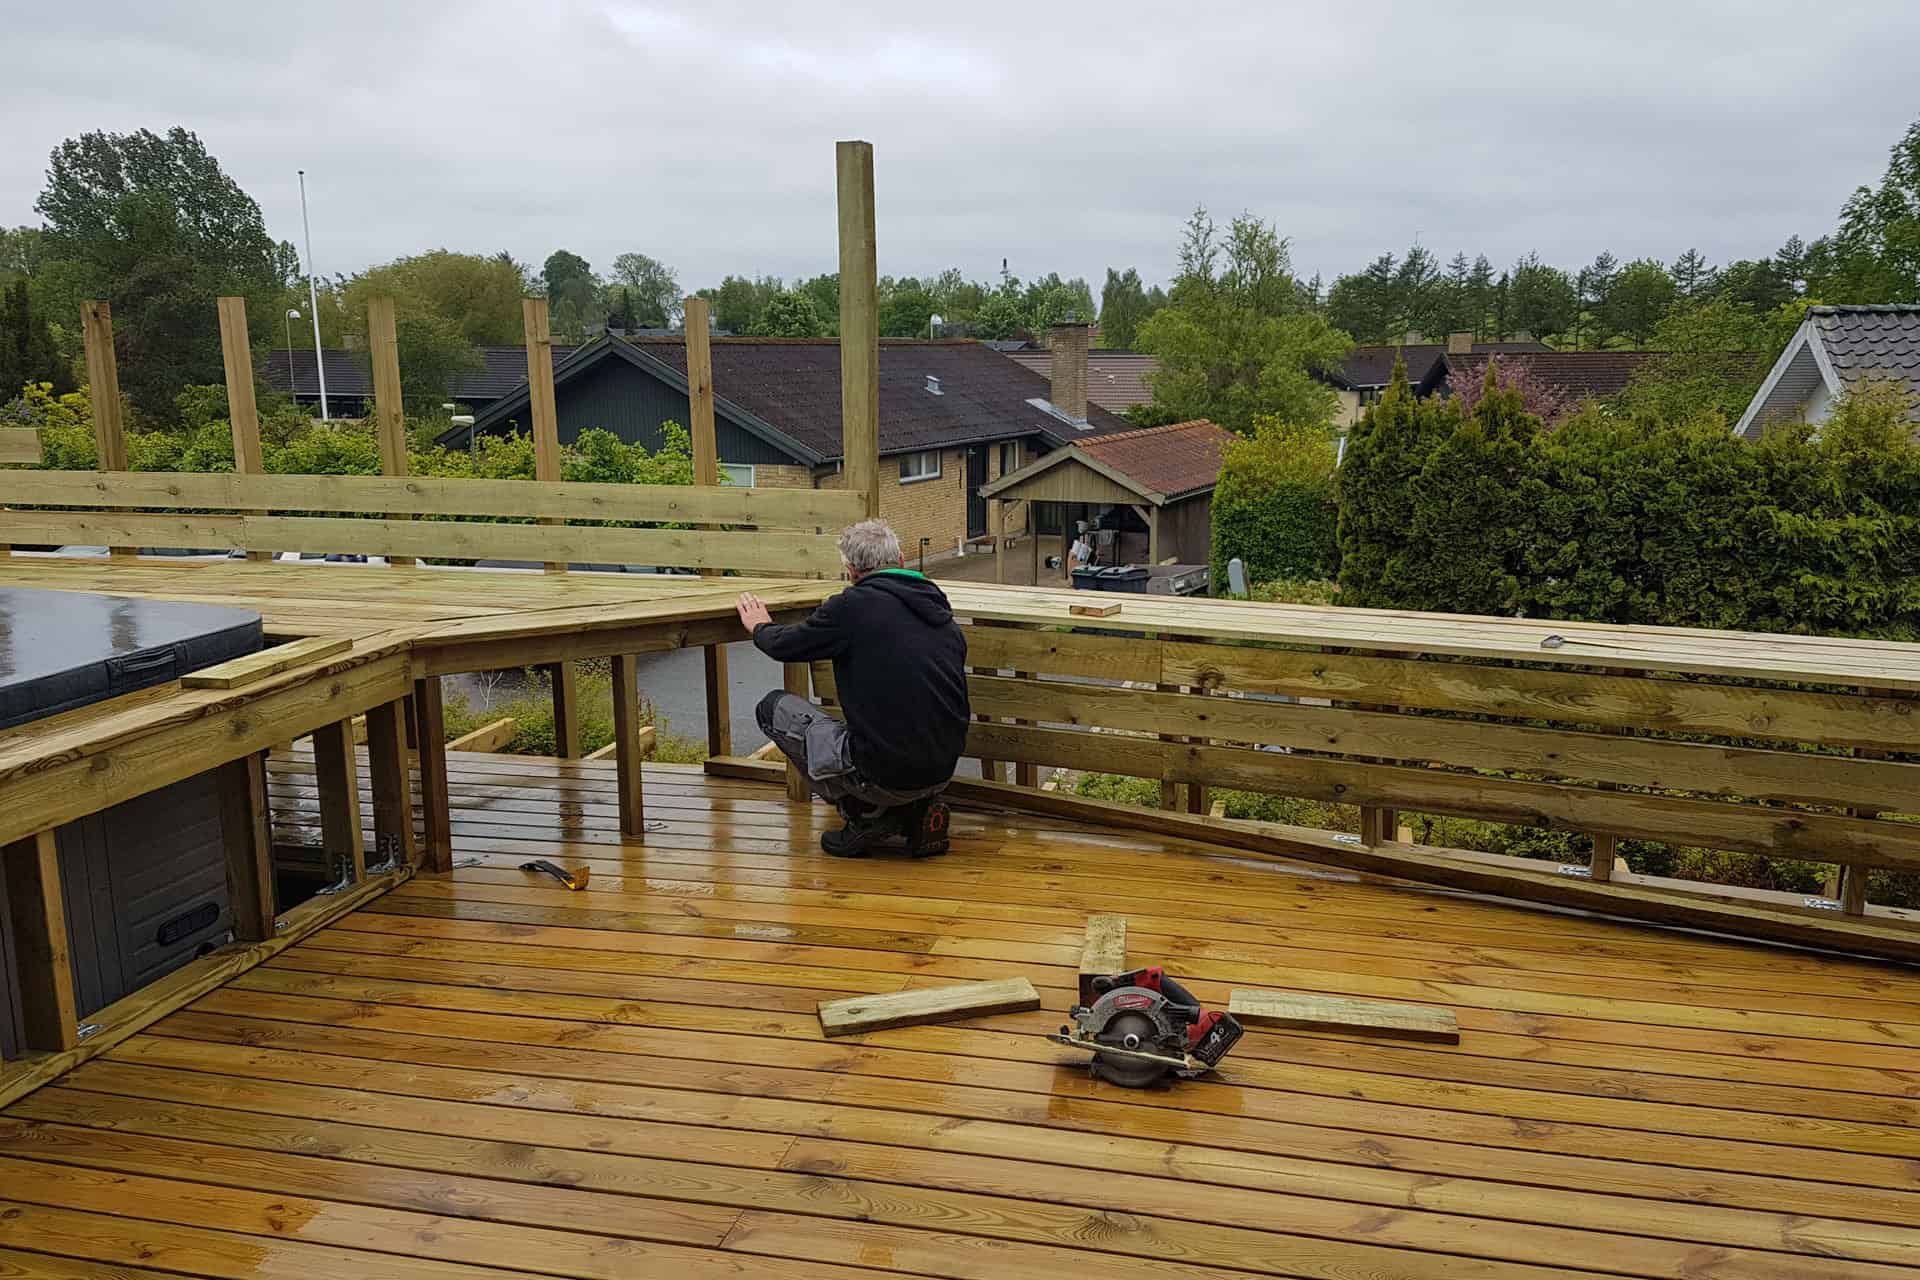 How to build a deck - wooden deck